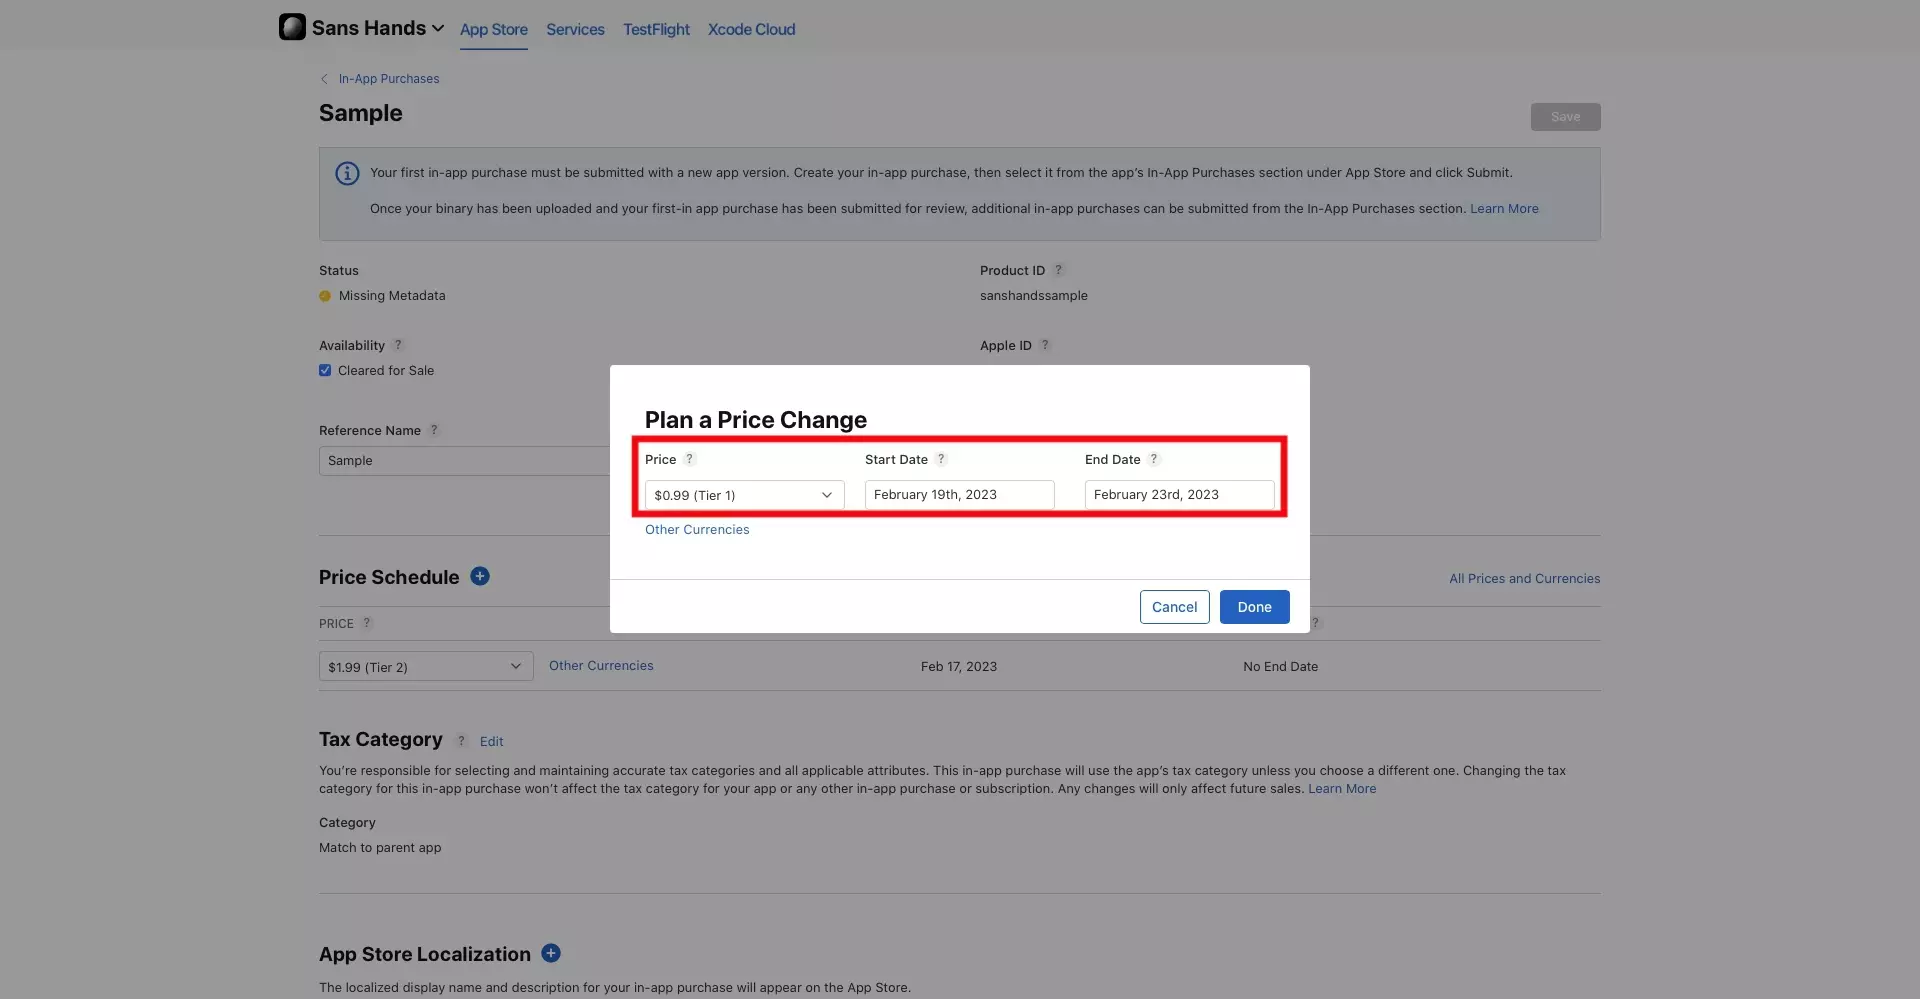 A screenshot of the In-App Purchase, Plan a Price Change modal that appears when you press "+". Highlighted is the area where you must fill in the details for "Price", "Start Date" and "End Date." Fill these in and move onto the next step.